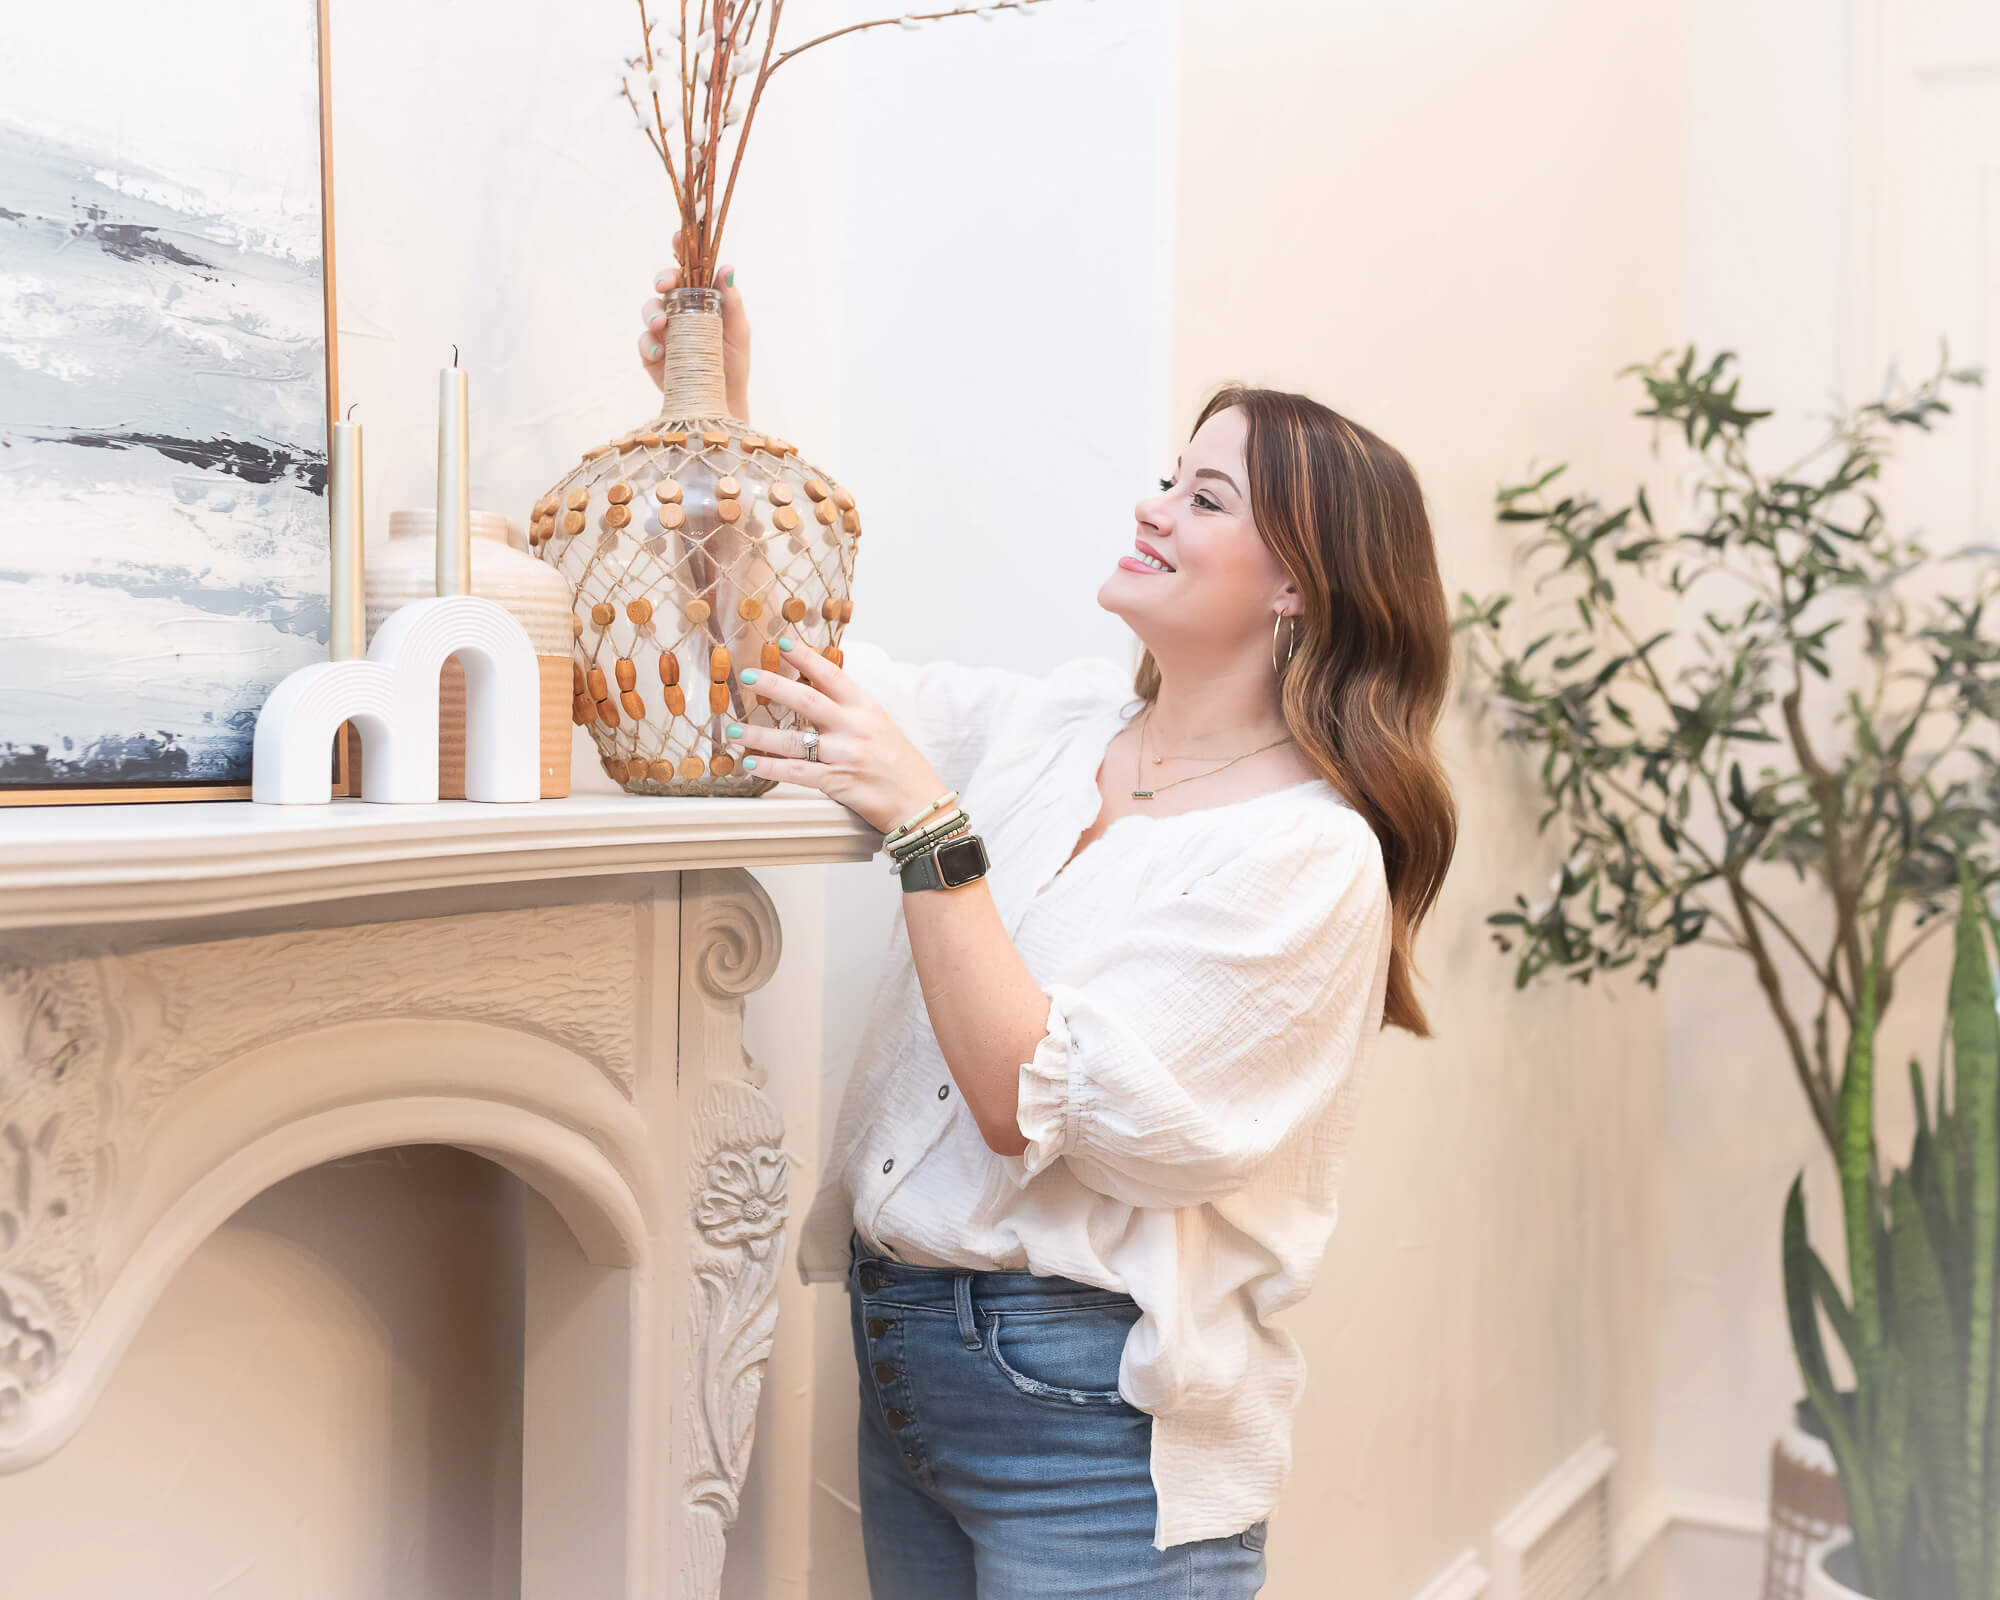 woman adding a vase to a mantle in a branding photogrpahy session for an interior design company